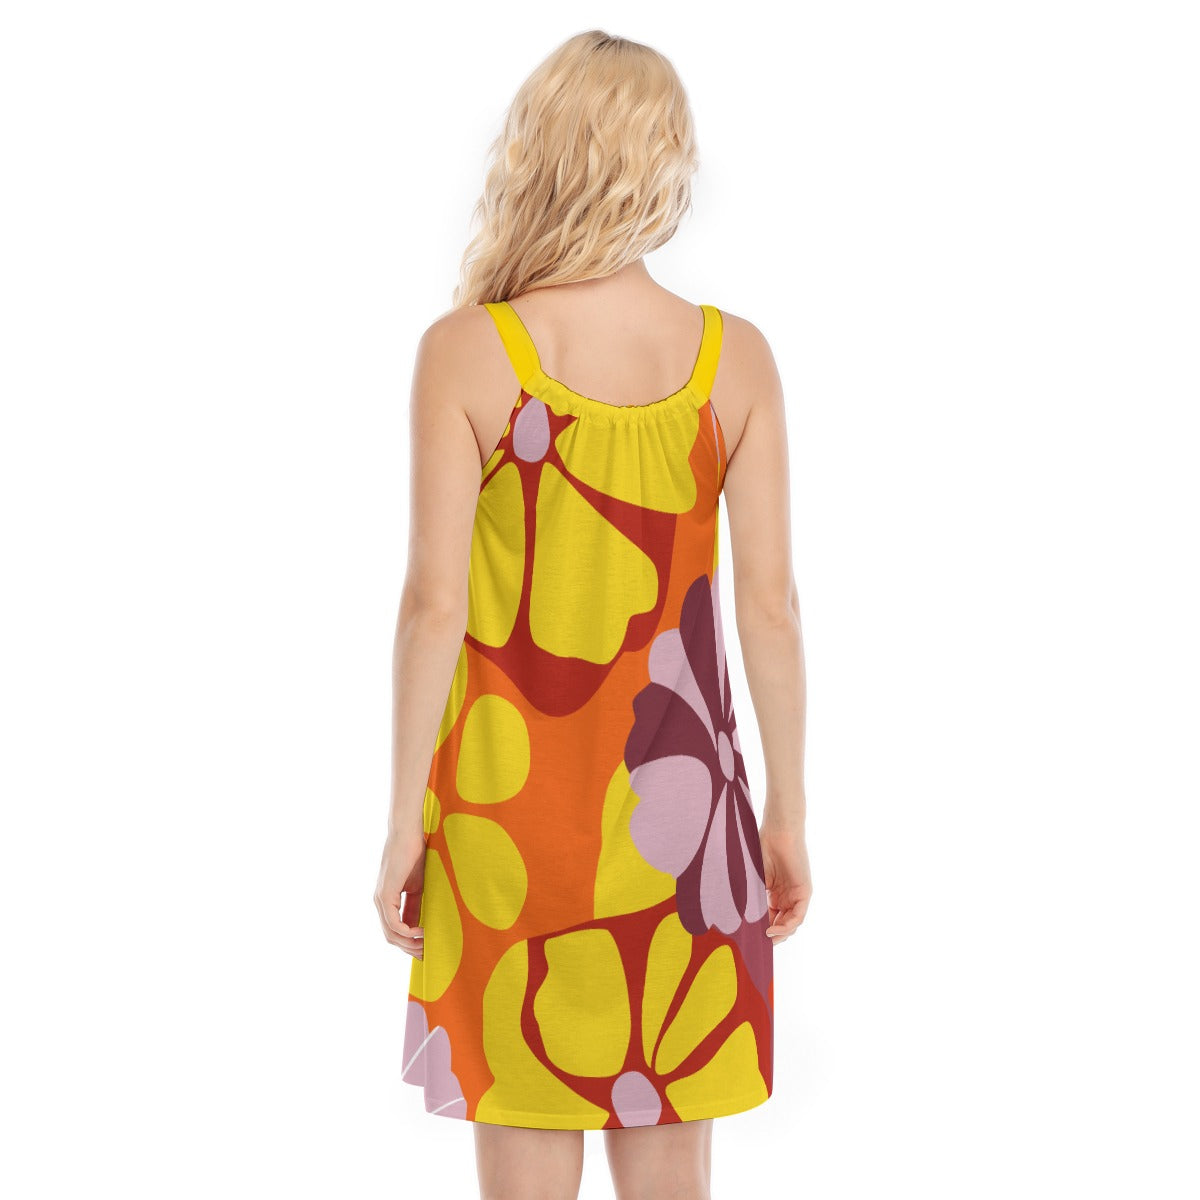 Vampire Art Retro Bold Sixties Florals Sleeveless Cami Dress - Yellows and Oranges with Lilac